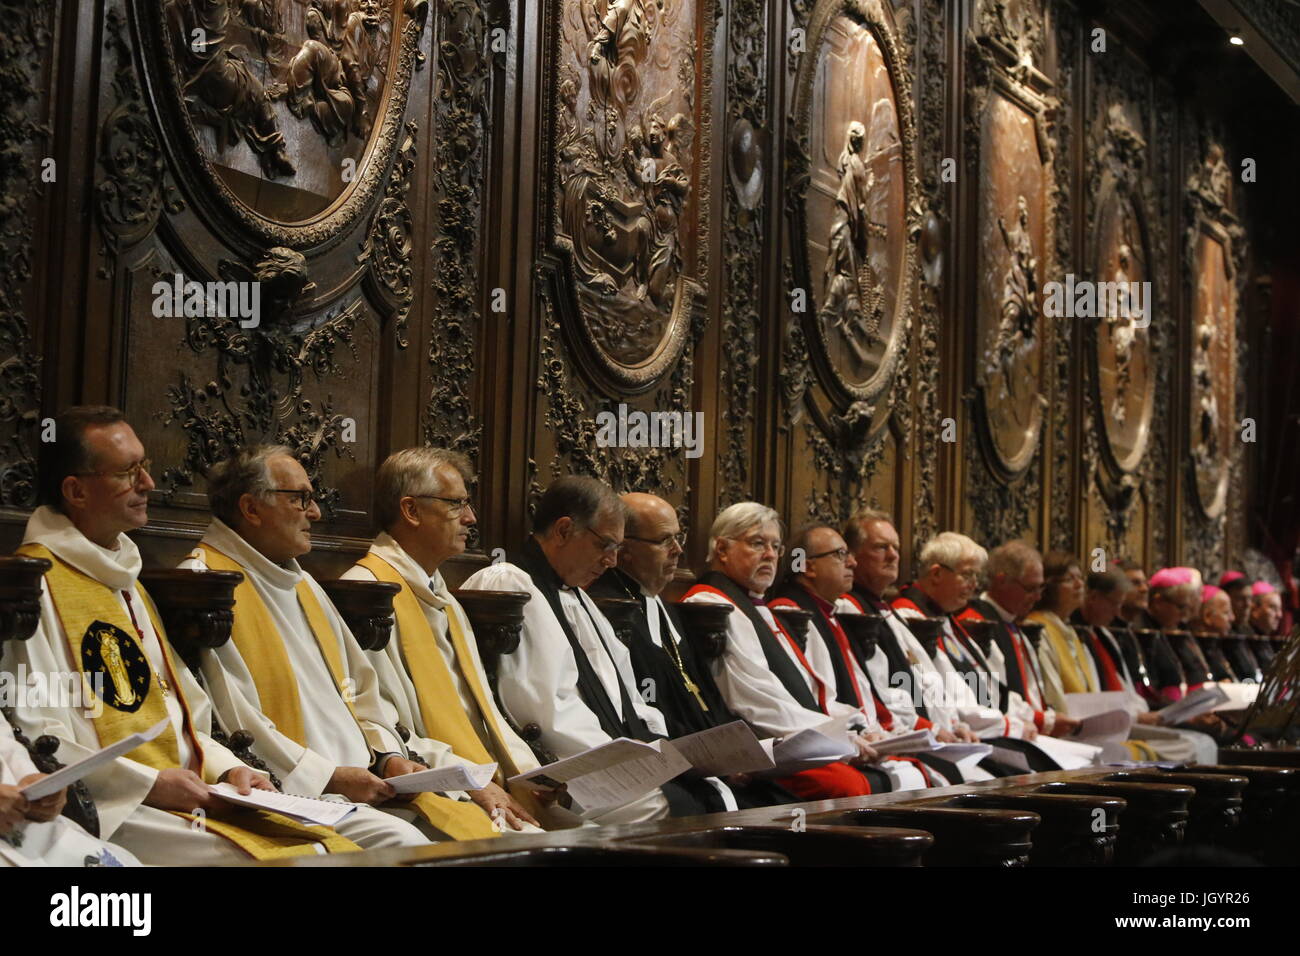 Ecumenical celebration in Notre Dame cathedral, Paris. Stock Photo